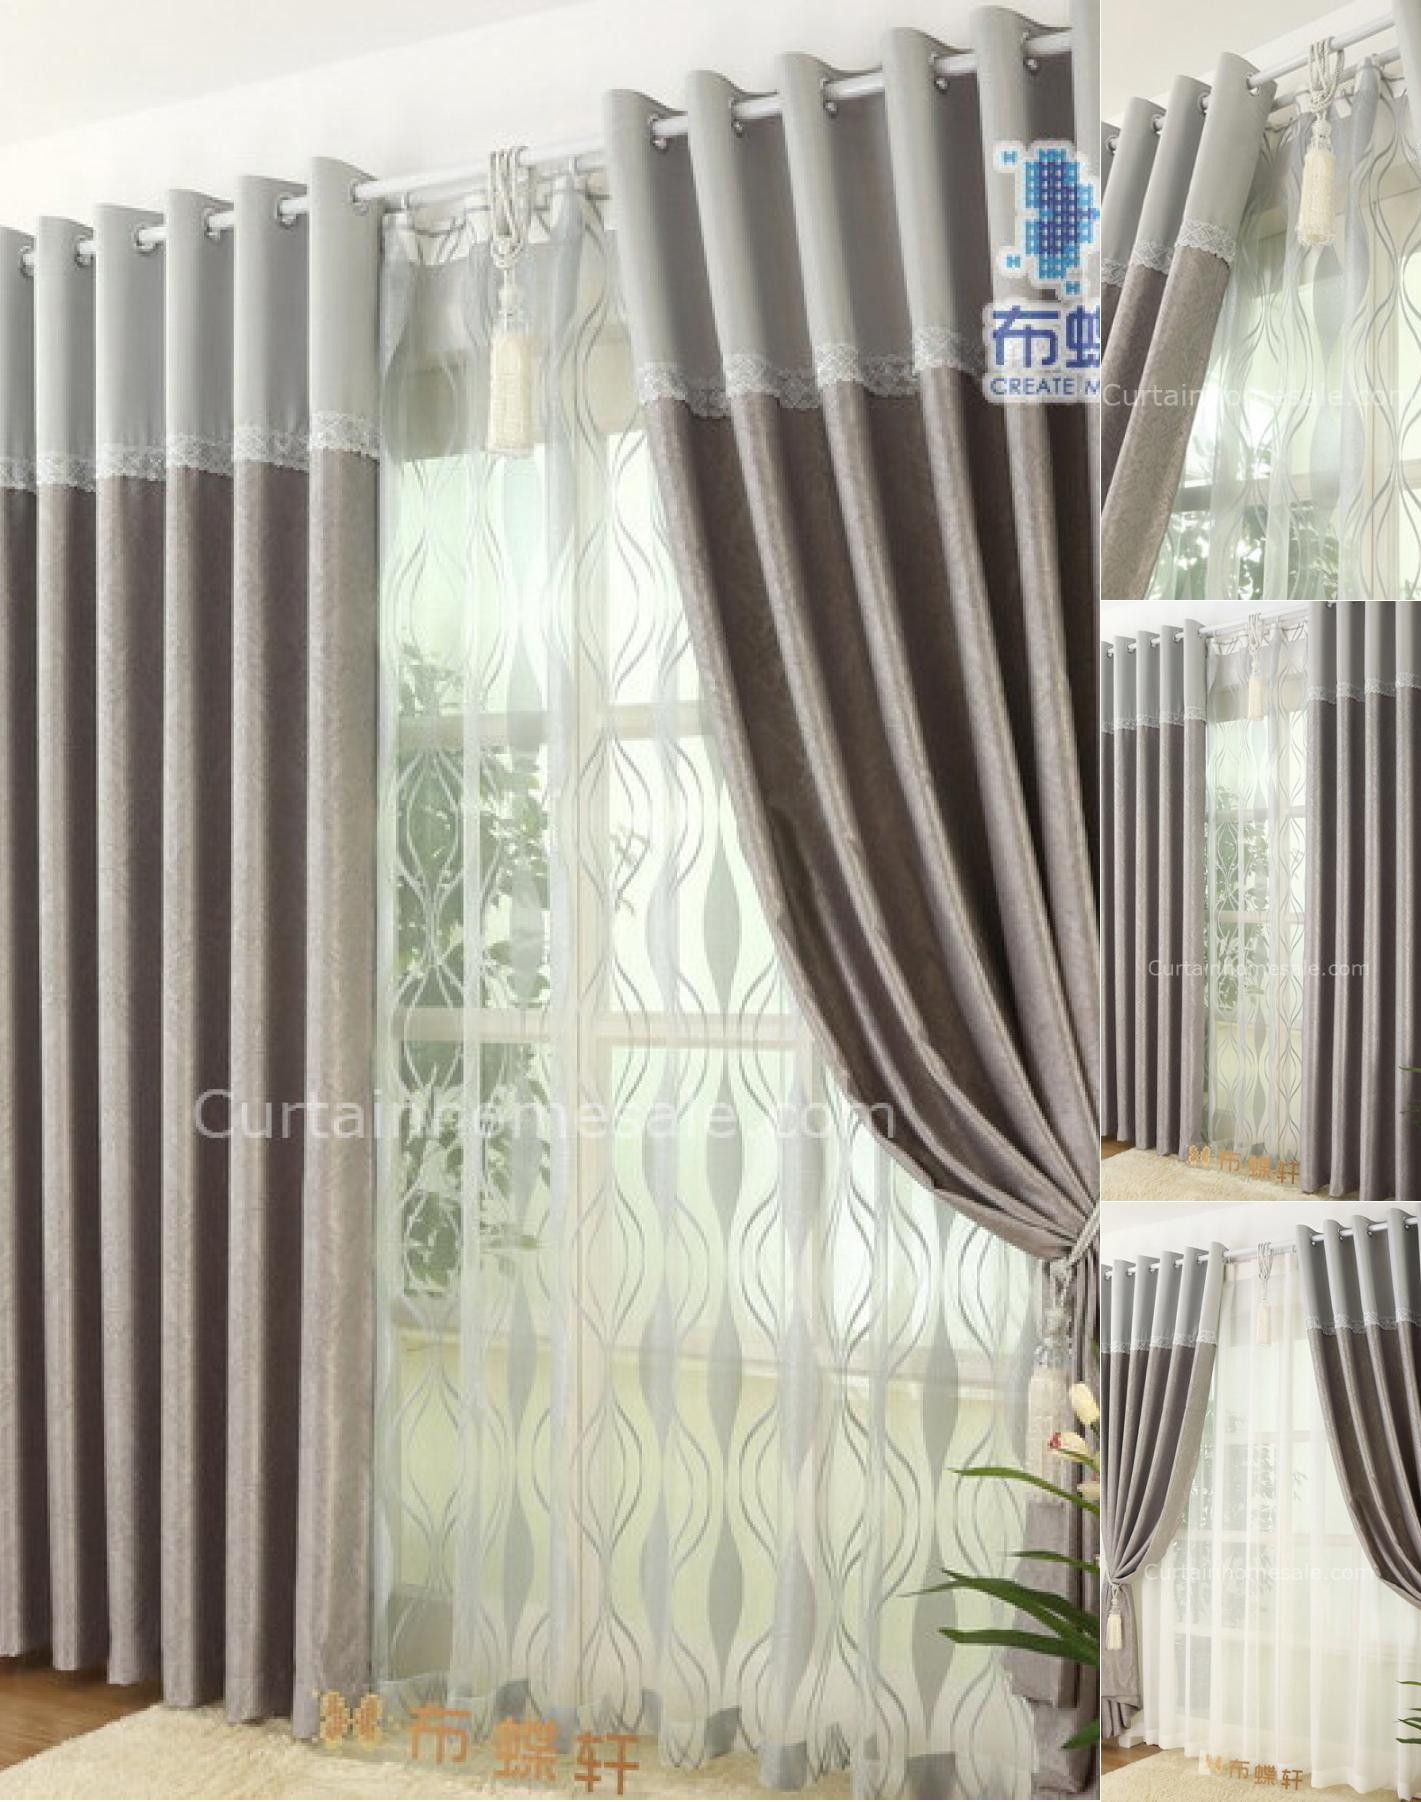 Overstock Kitchen Curtains
 Stylish Silver and Grey Thermal Eco friendly Overstock